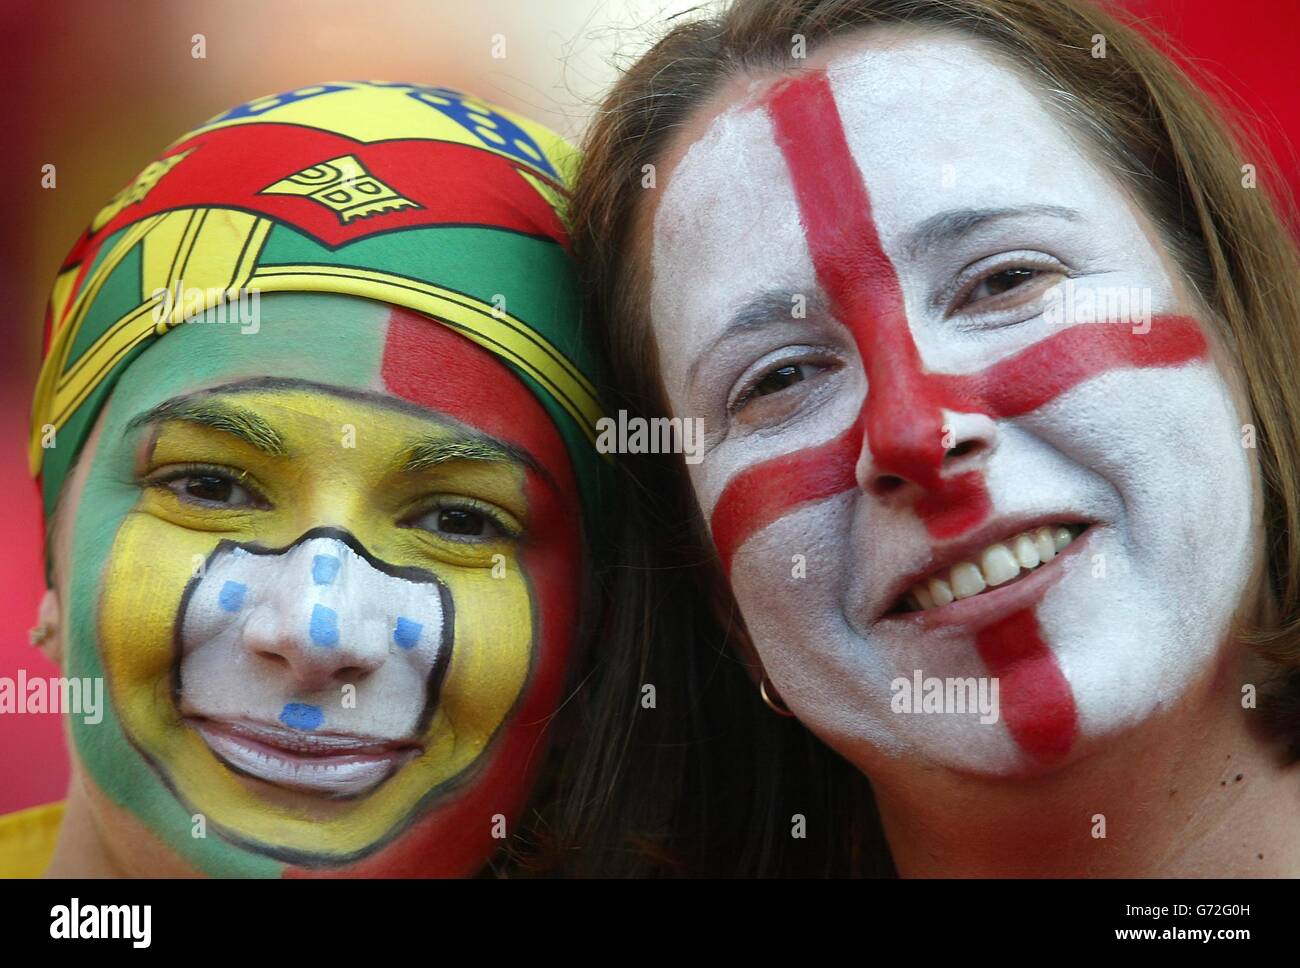 An English and a Portugese fan (left) at the Estadio da Luz, Lisbon, Thursday June 24 2004, ahead of the evening's Euro 2004 quarter-final clash between England and Portugal. Stock Photo